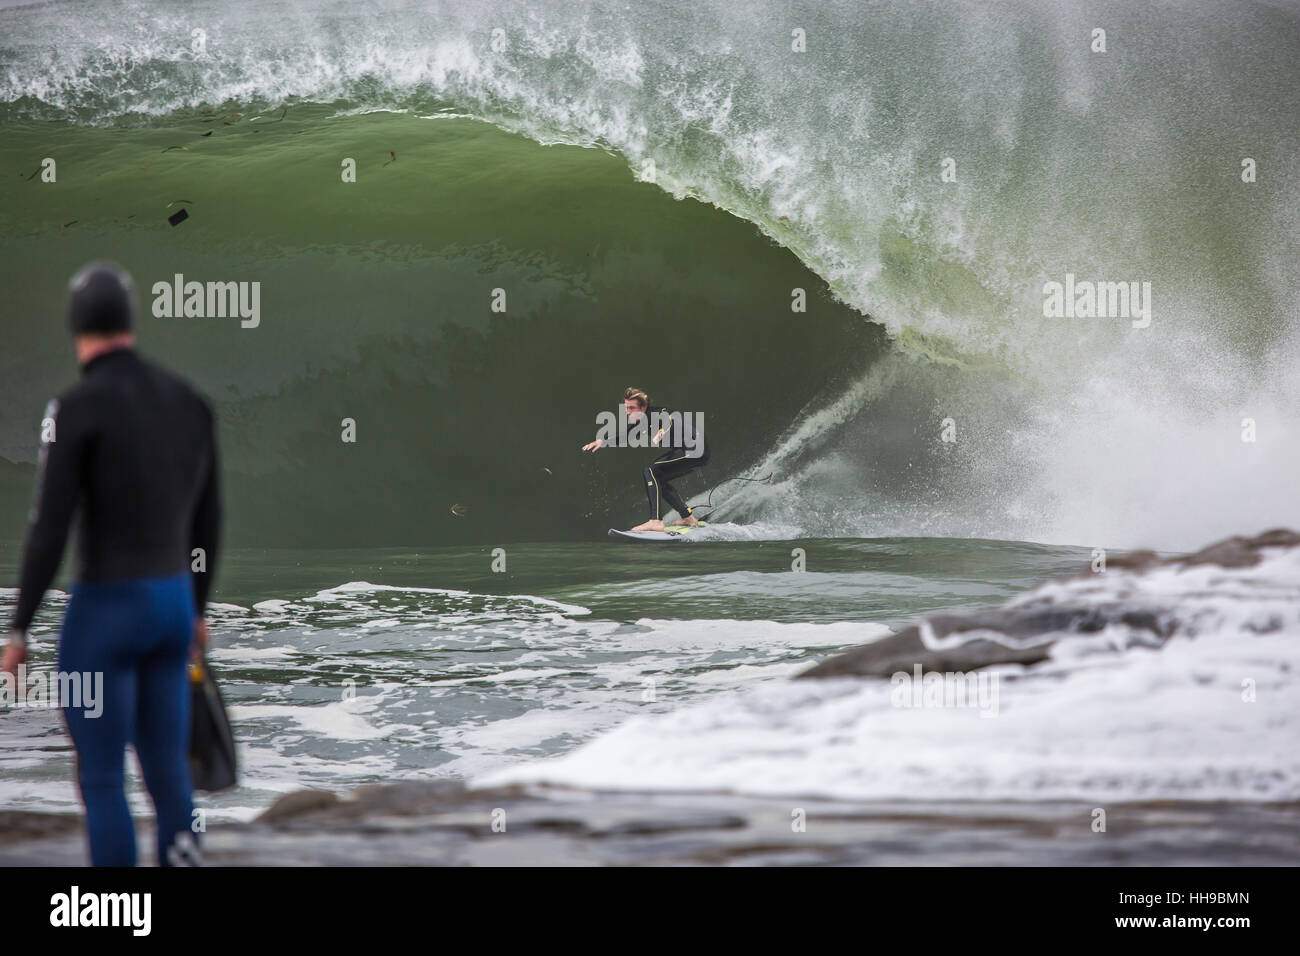 Page 2 Big Wave Surfing High Resolution Stock Photography And Images Alamy